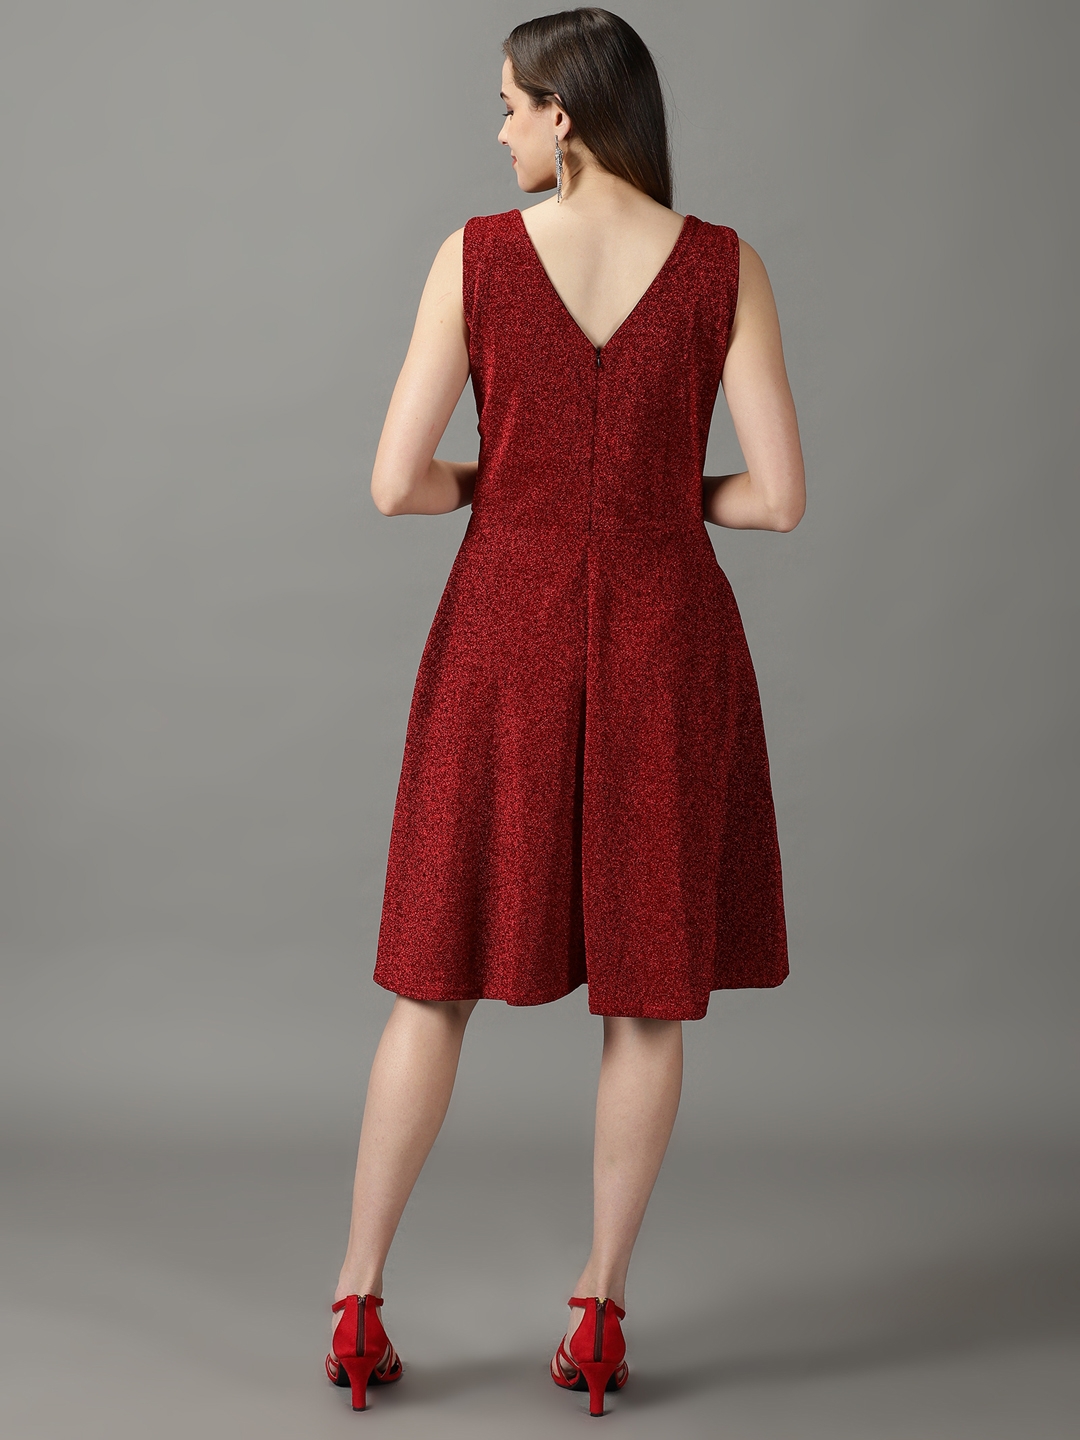 Buy ONLY Red Fit & Flare Dress - Dresses for Women 1125110 | Myntra